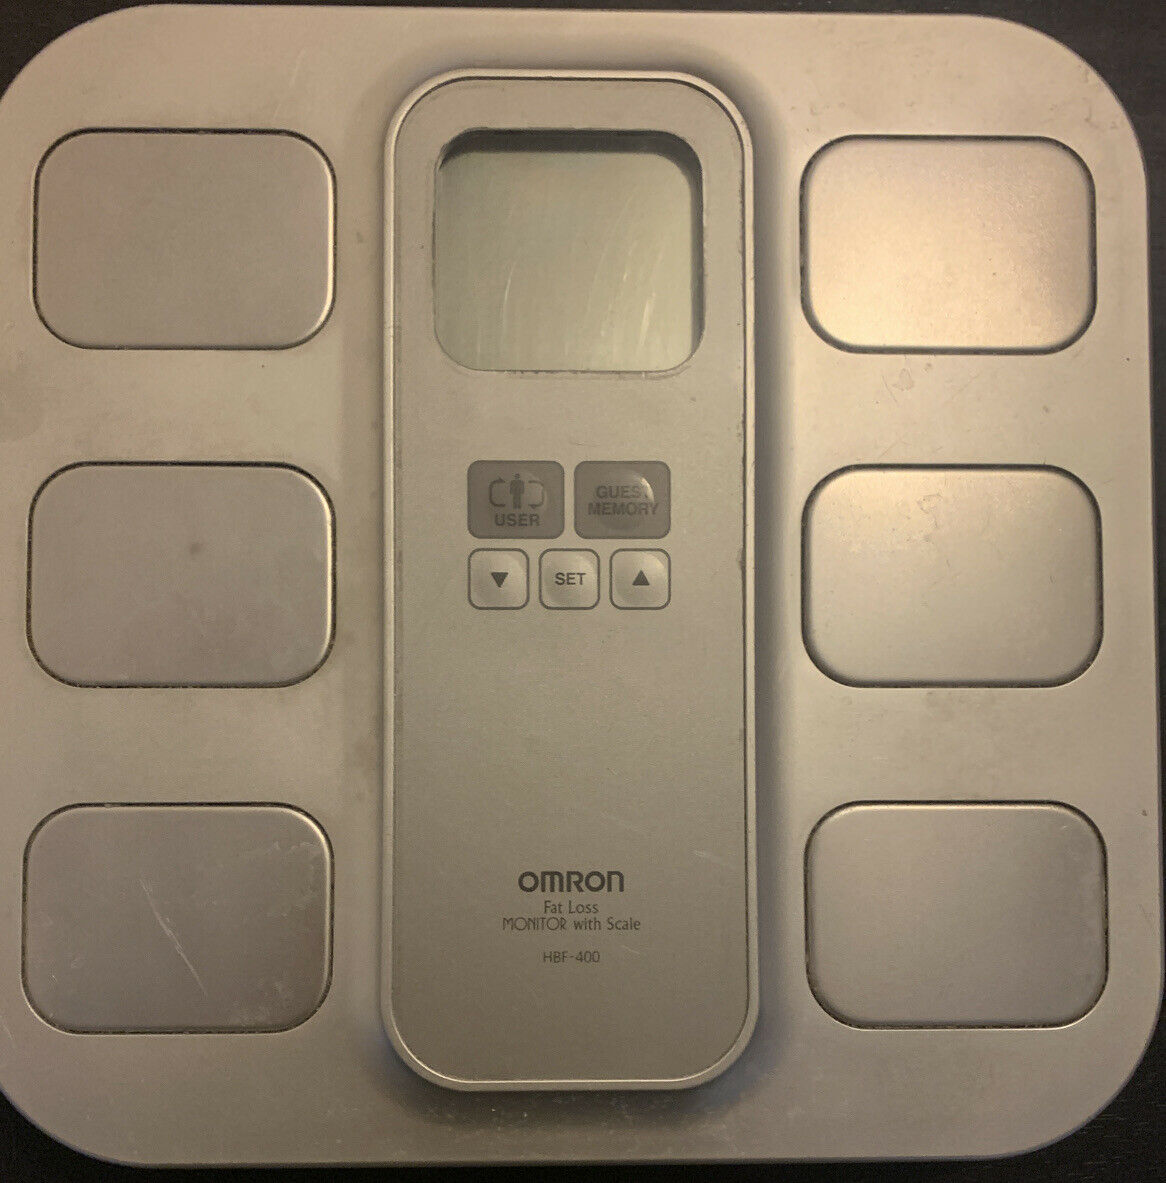 Omron Hbf-400 Body Fat Loss Monitor With Scale